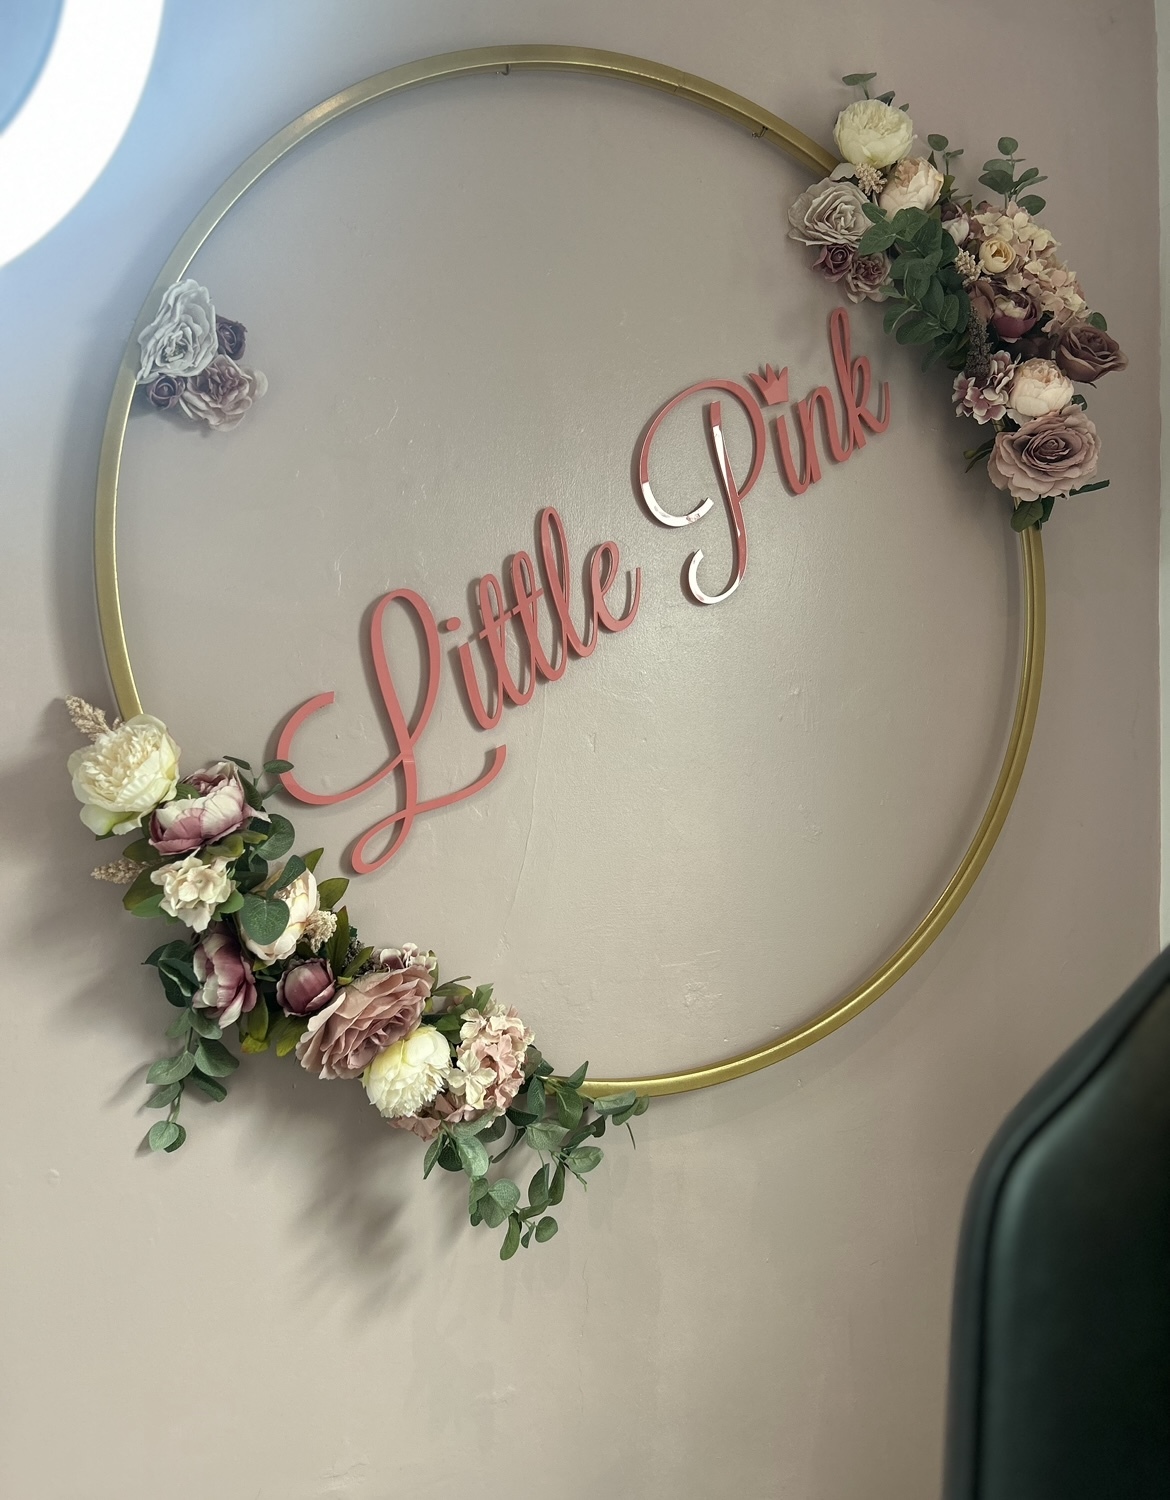 Little Pink opened in October 2020